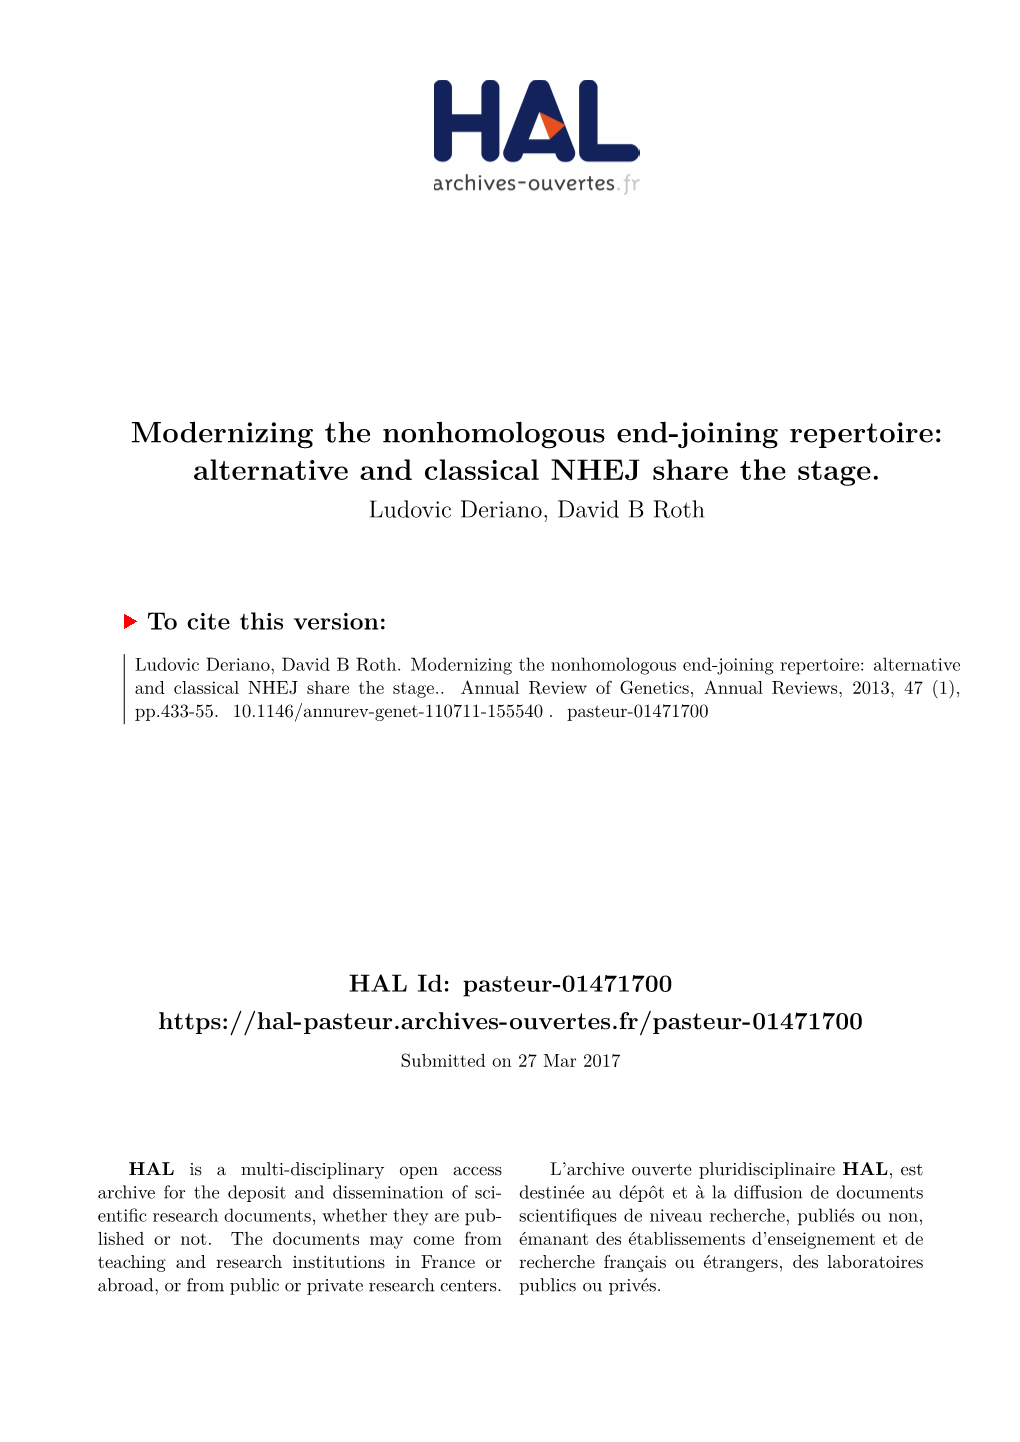 Modernizing the Nonhomologous End-Joining Repertoire: Alternative and Classical NHEJ Share the Stage